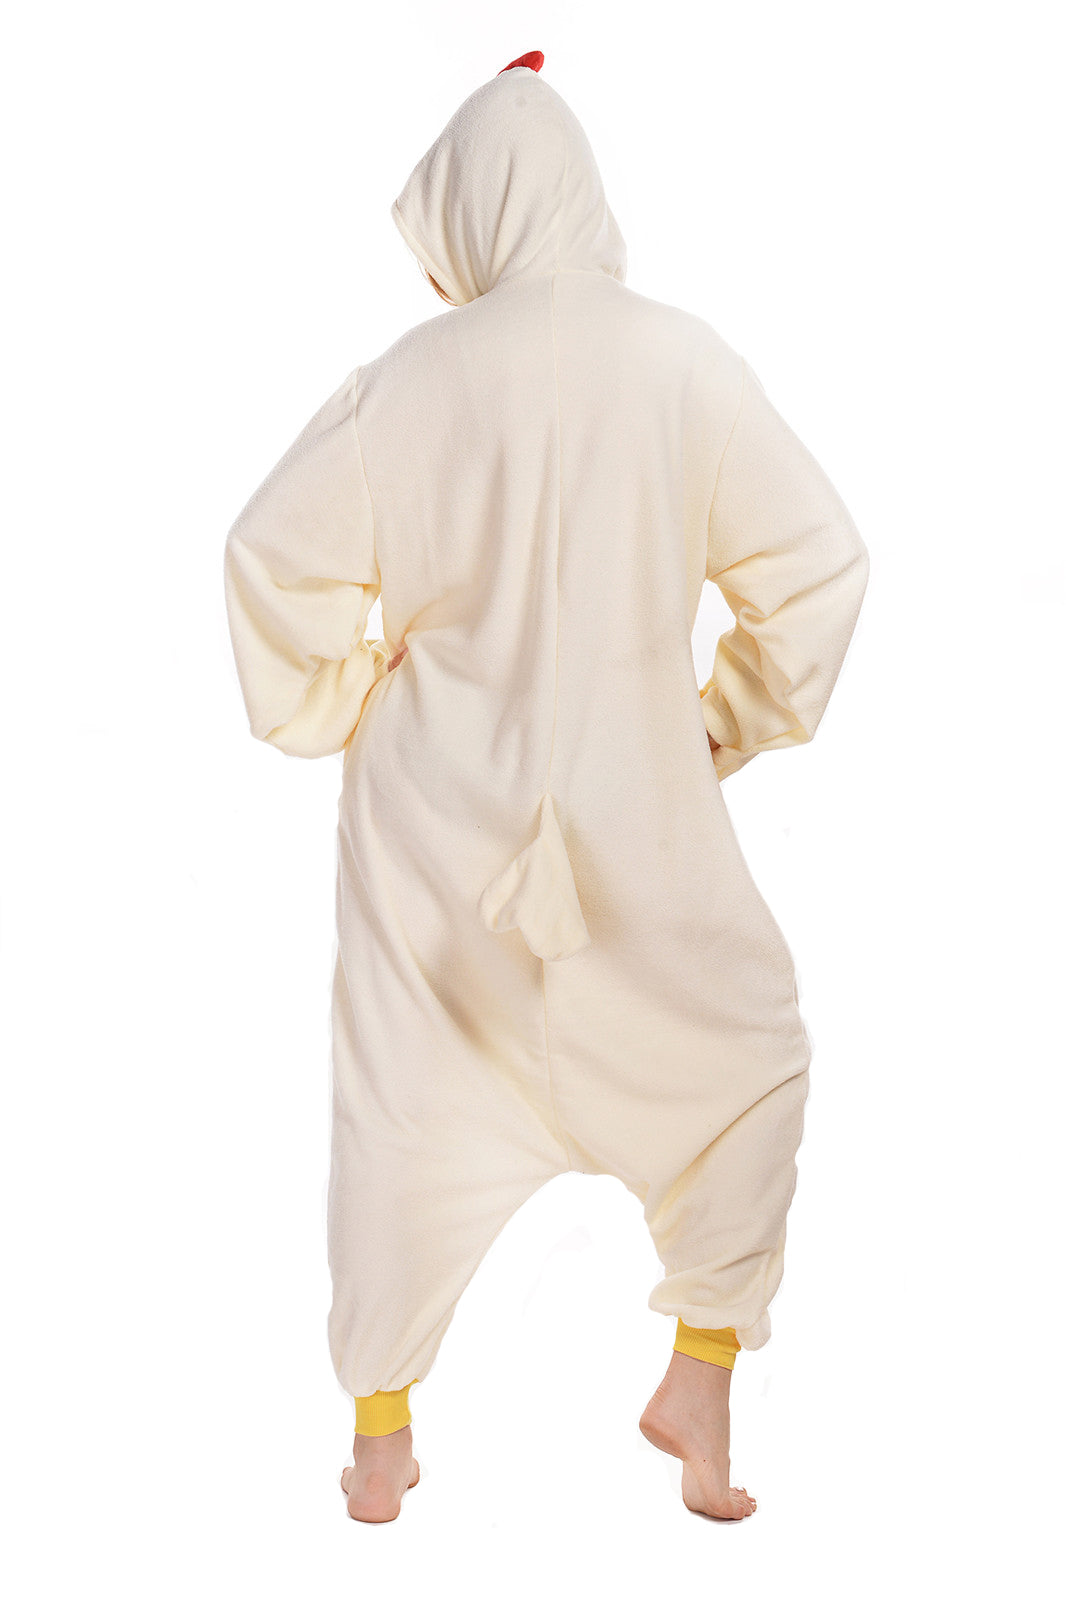 yo mismo popurrí Sur oeste Chicken Cosplay Onesie Pajamas on newcosplay.net | Free 2-day Shipping –  NEWCOSPLAY